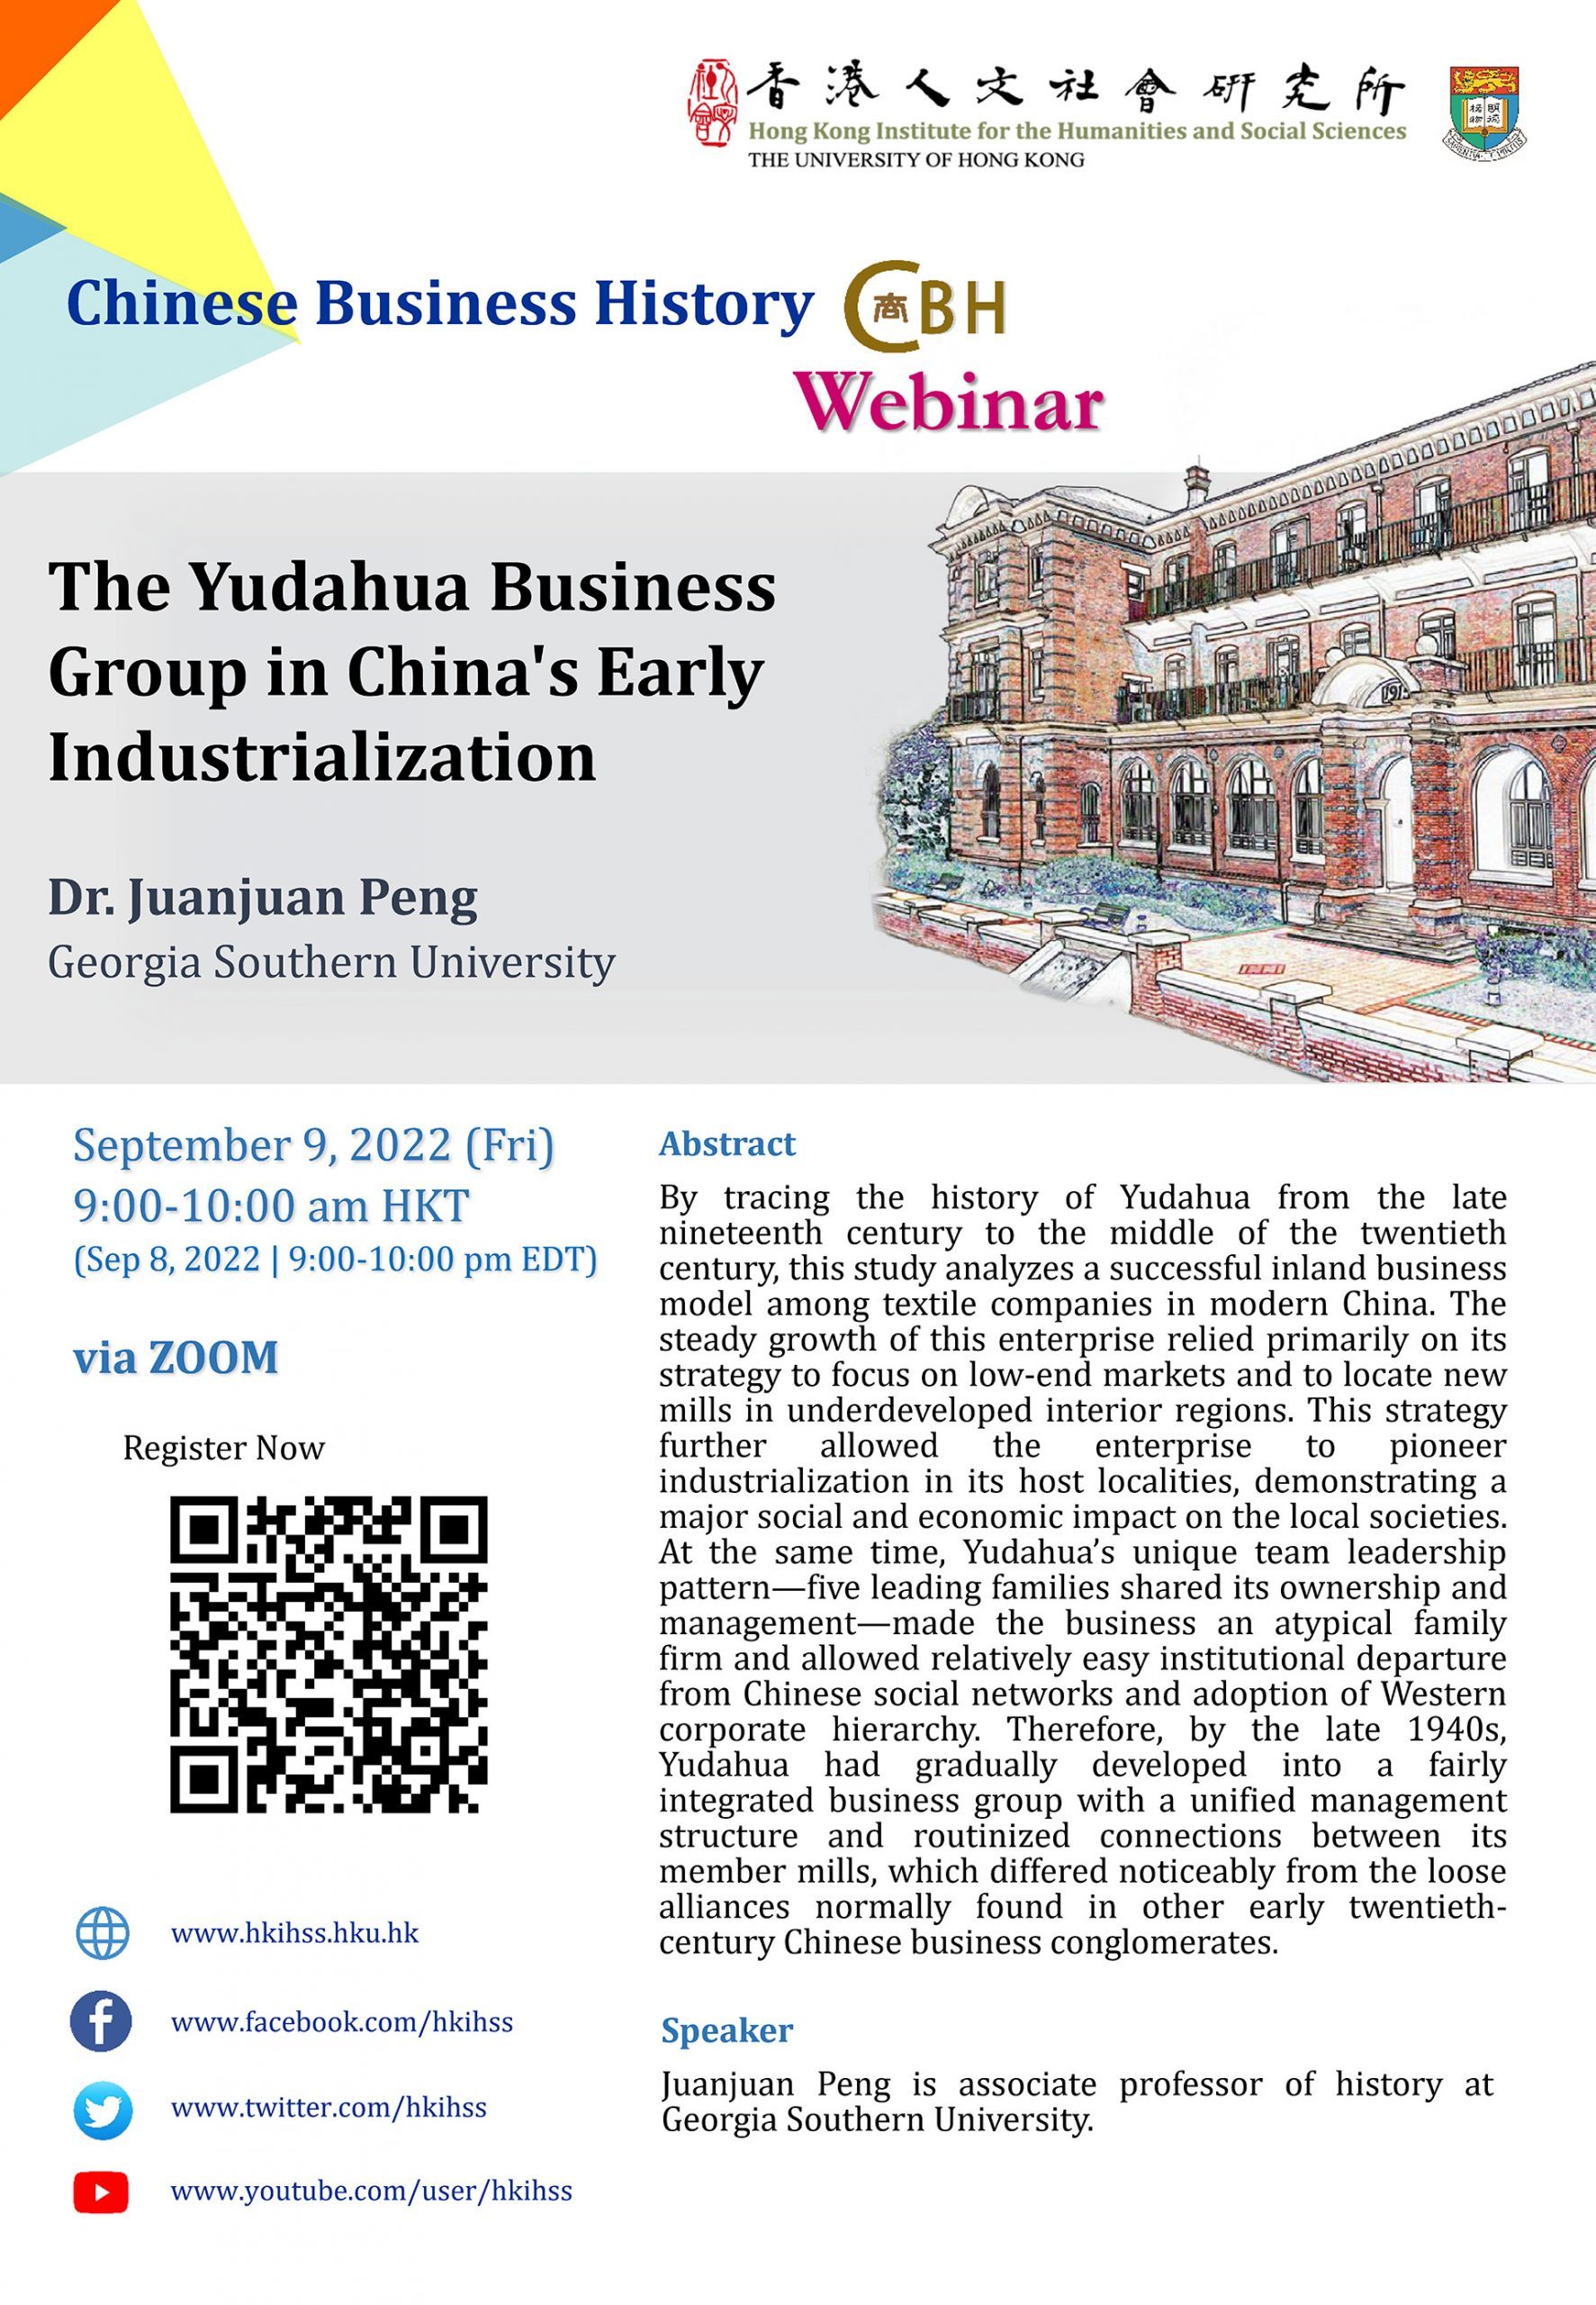 Chinese Business History Webinar on “The Yudahua Business Group in China's Early Industrialization” by Dr. Juanjuan Peng (September 9, 2022)